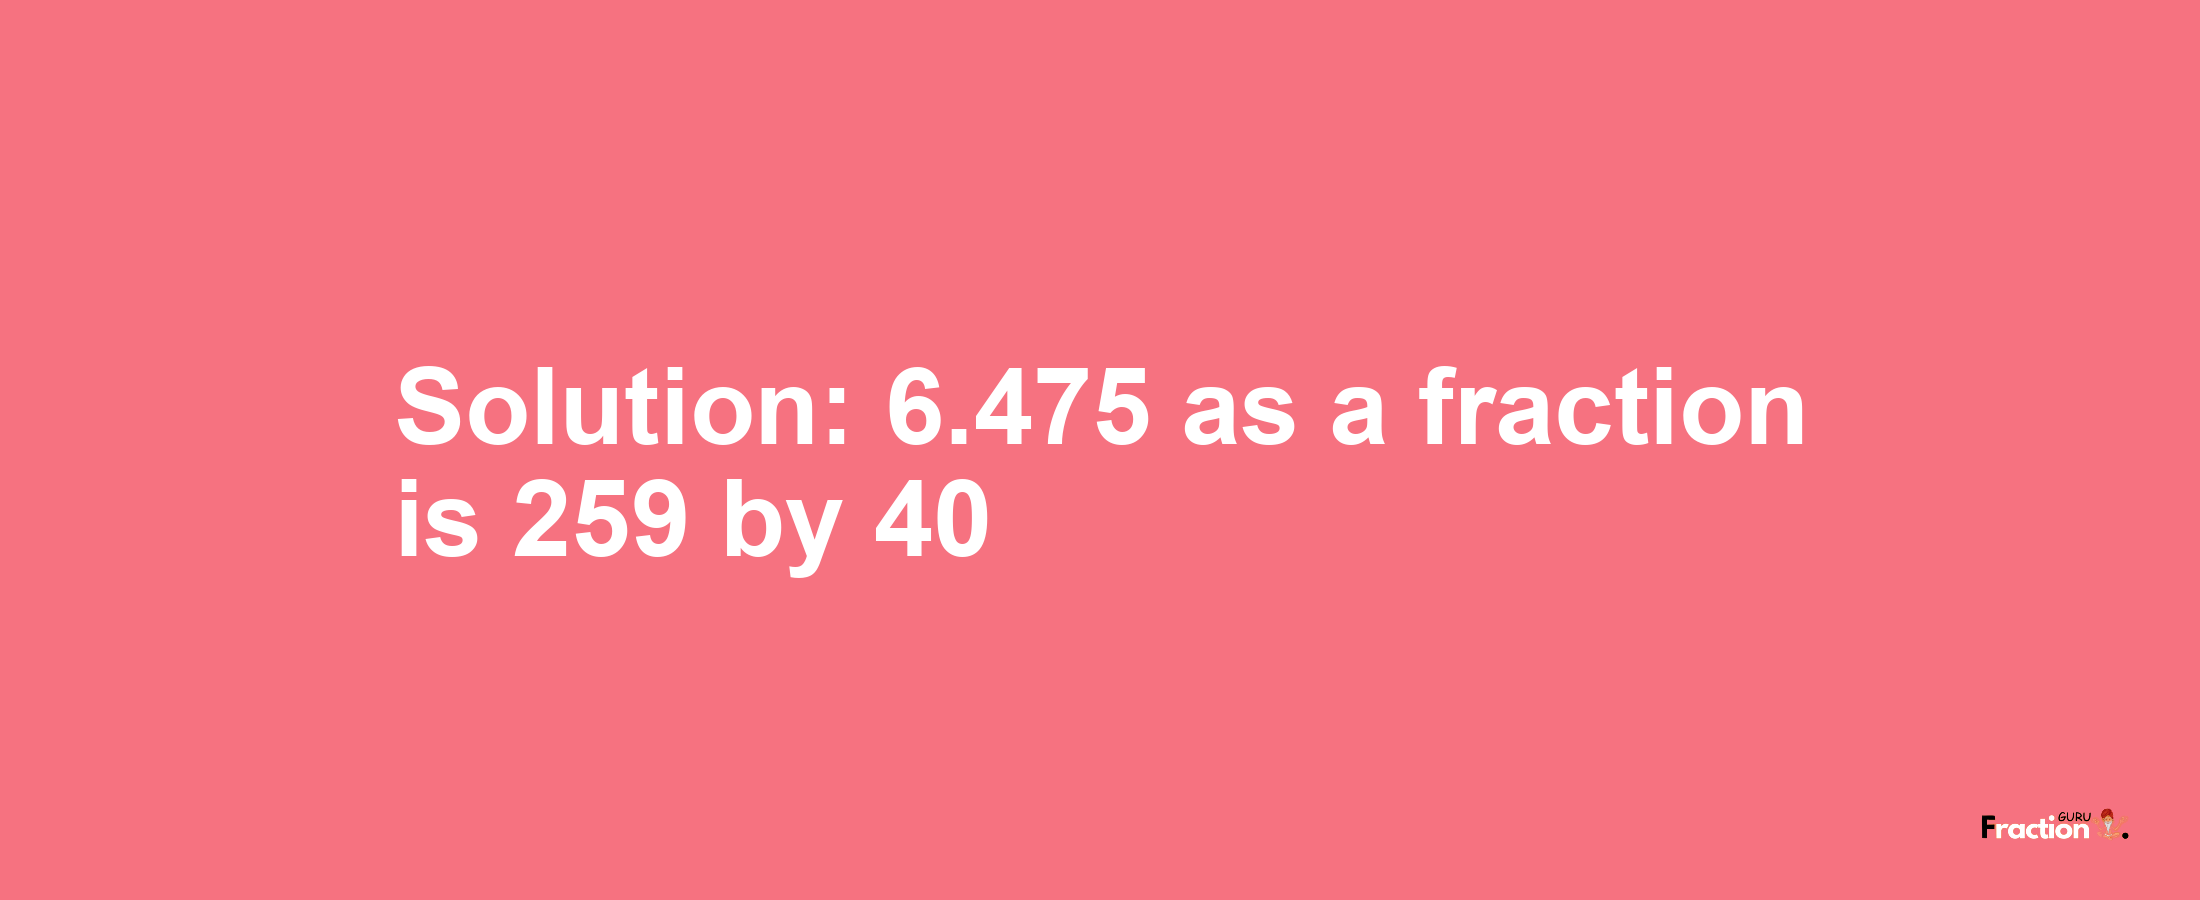 Solution:6.475 as a fraction is 259/40